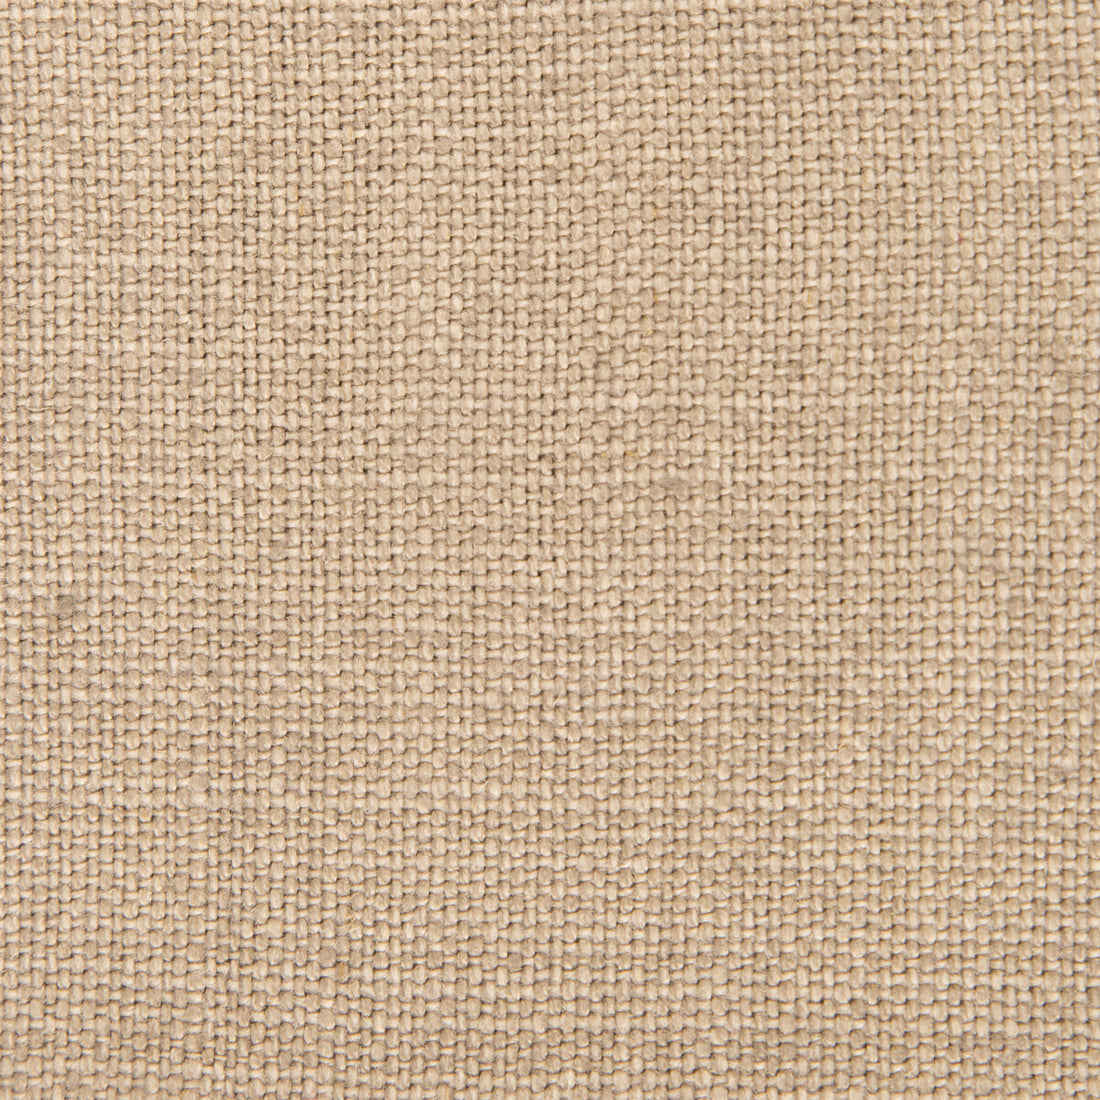 Nicaragua fabric in topo color - pattern GDT5239.025.0 - by Gaston y Daniela in the Basics collection